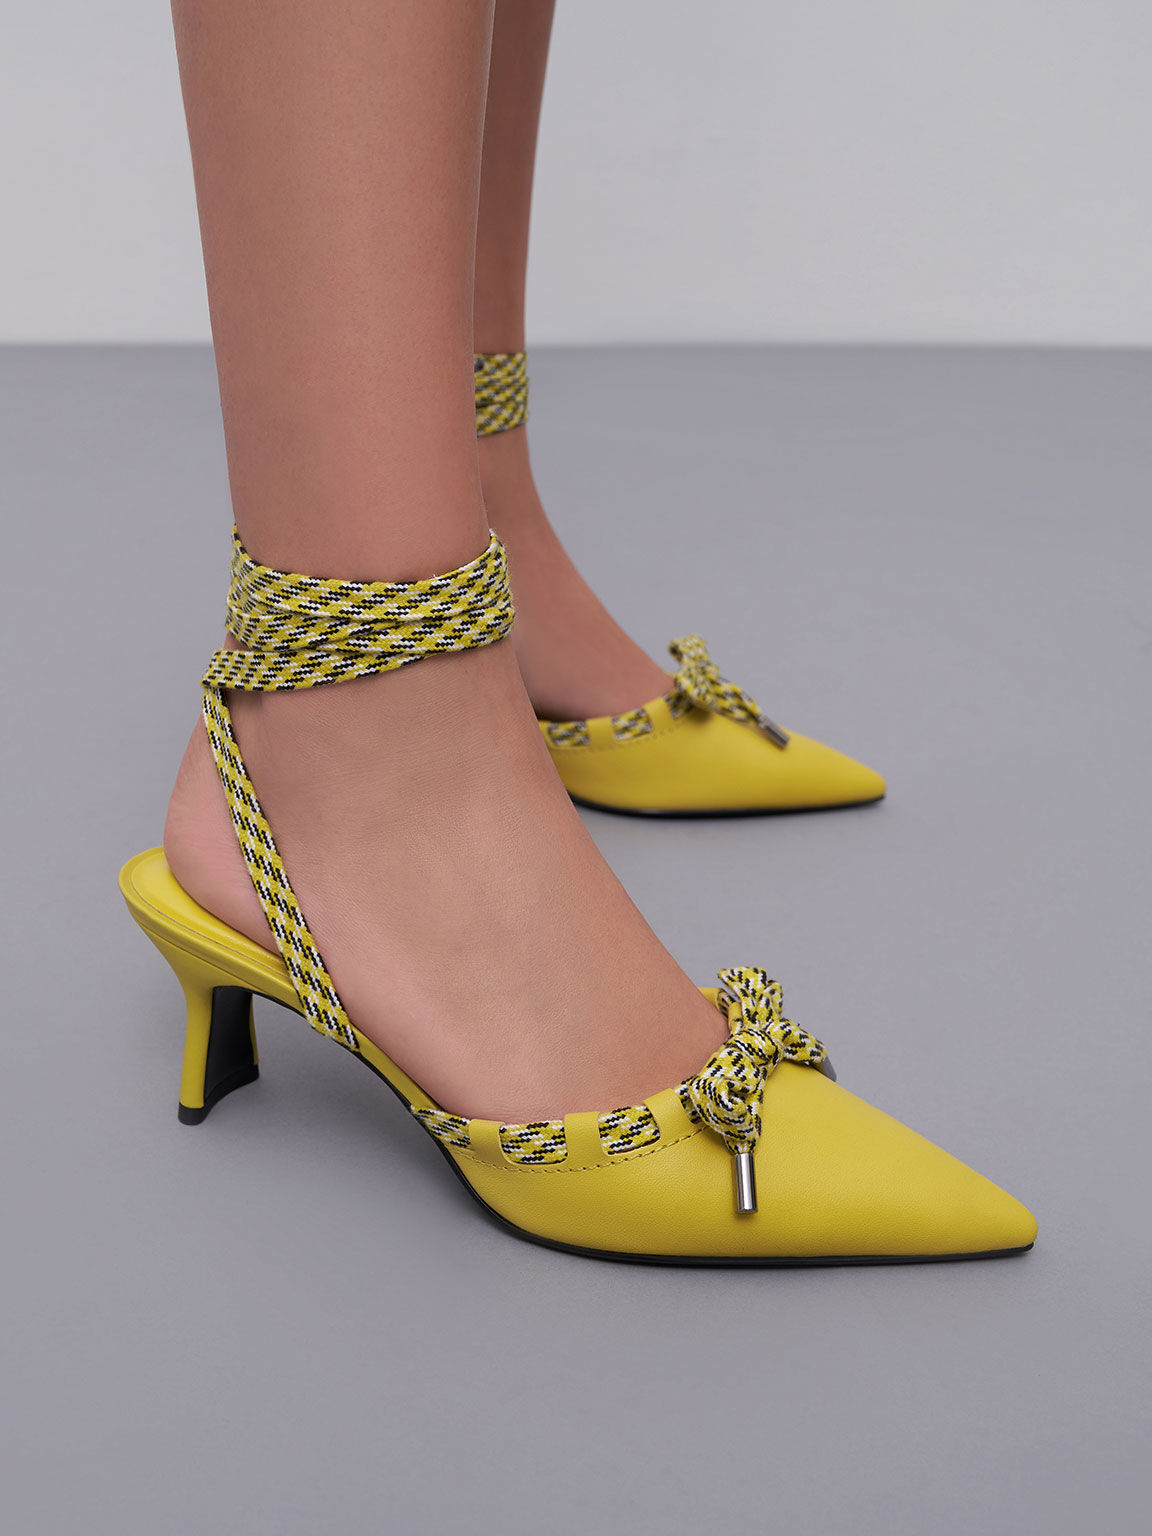 Lace-Up Leather Pumps, Yellow, hi-res